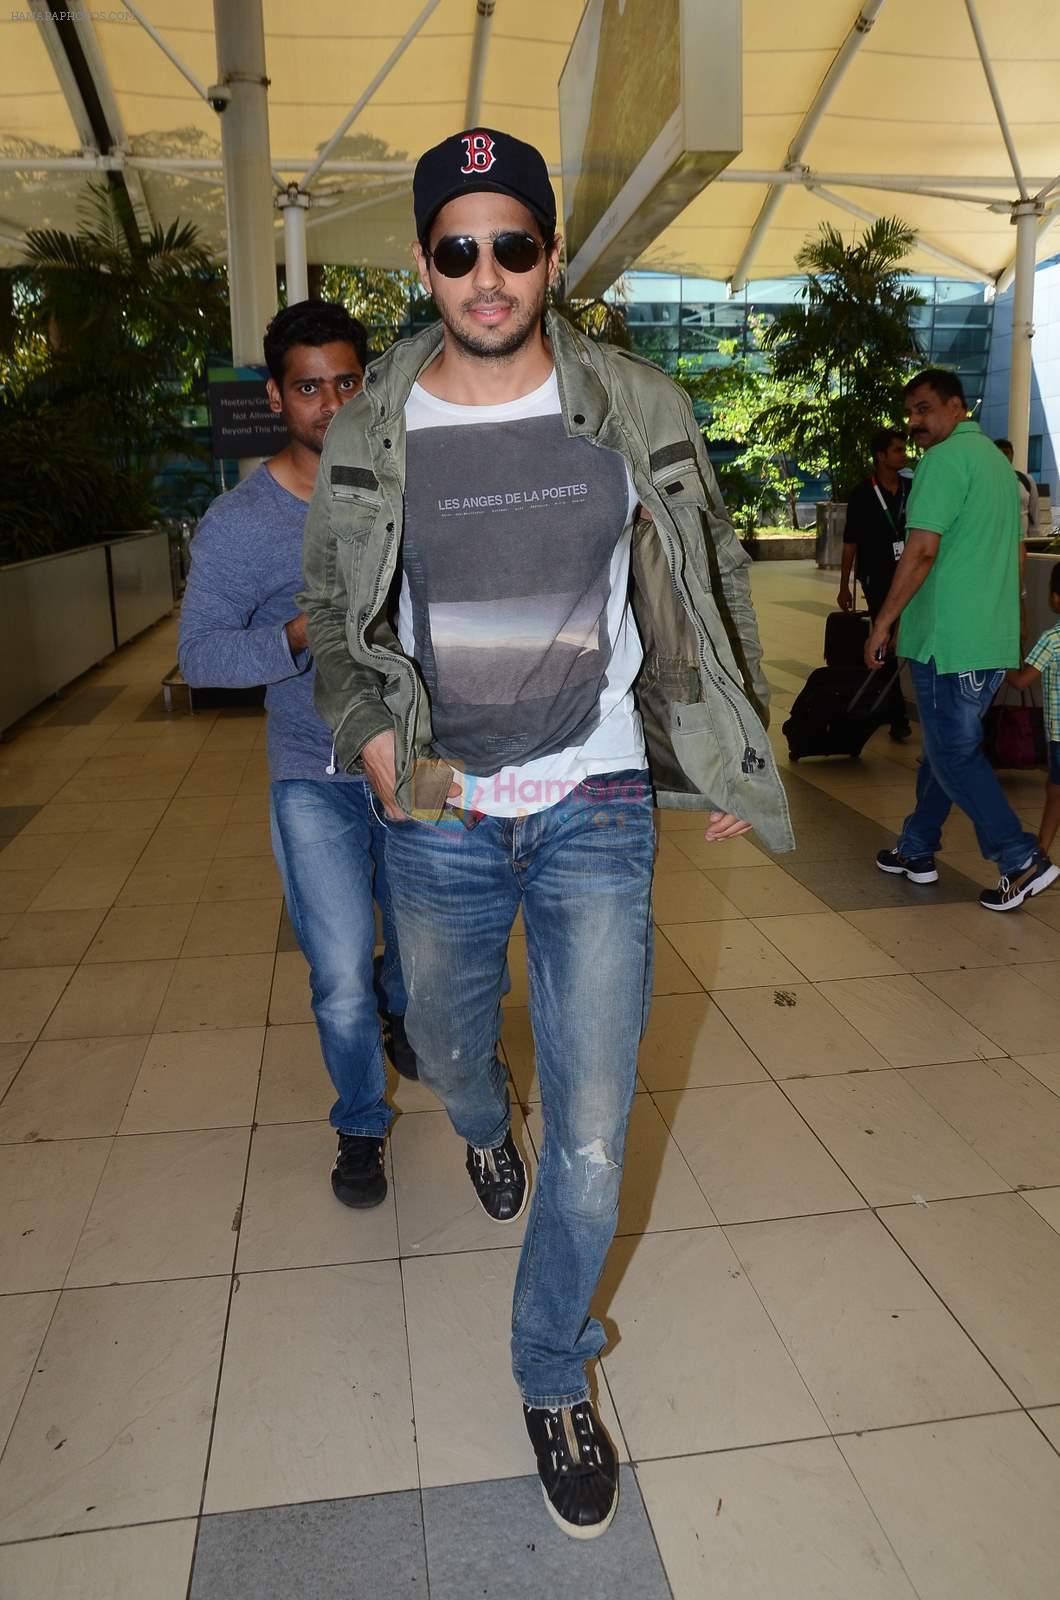 Sidharth Malhotra snapped in Mumbai Airport on 10th June 2015